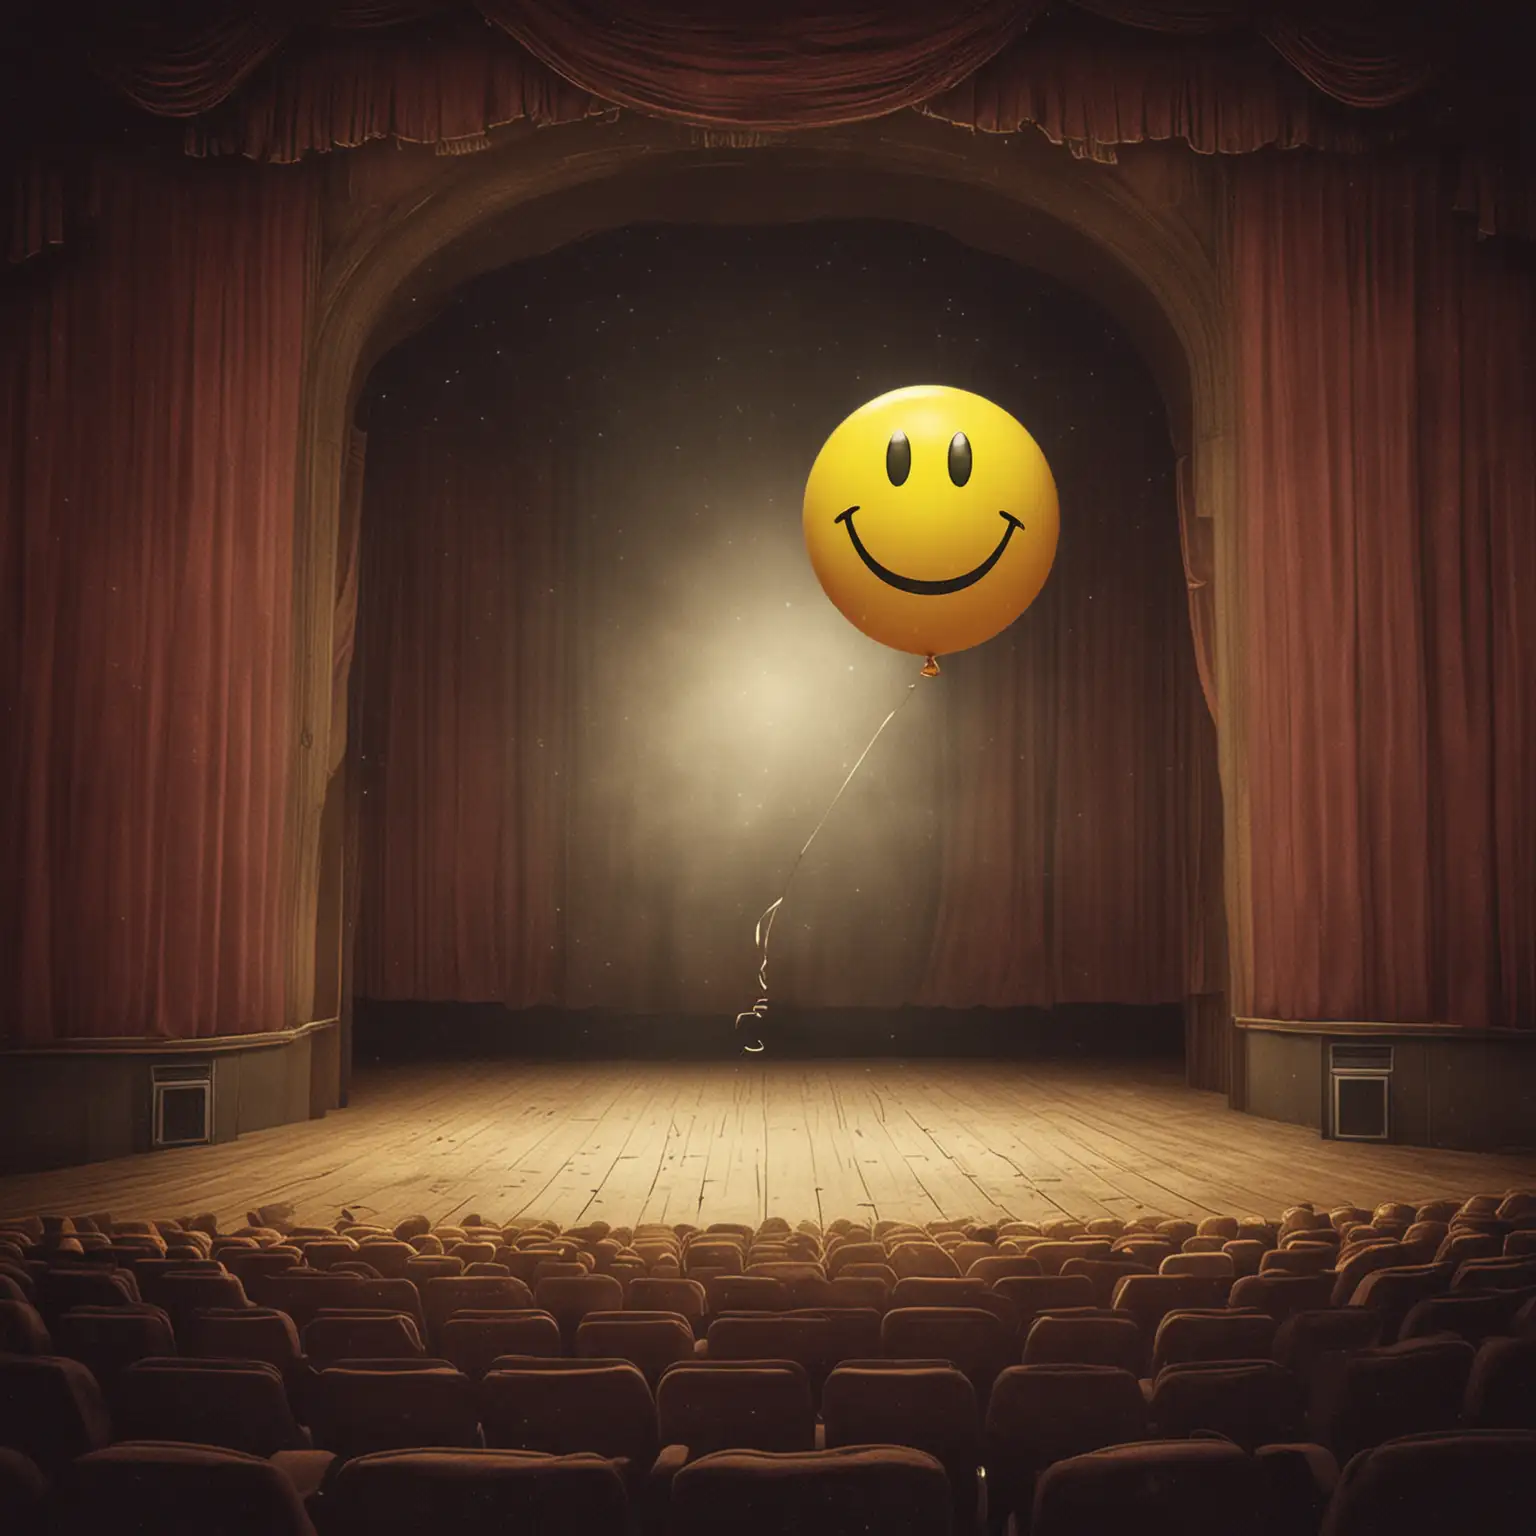 Create an album cover of a smiley faced balloon floating on a empty theater stage